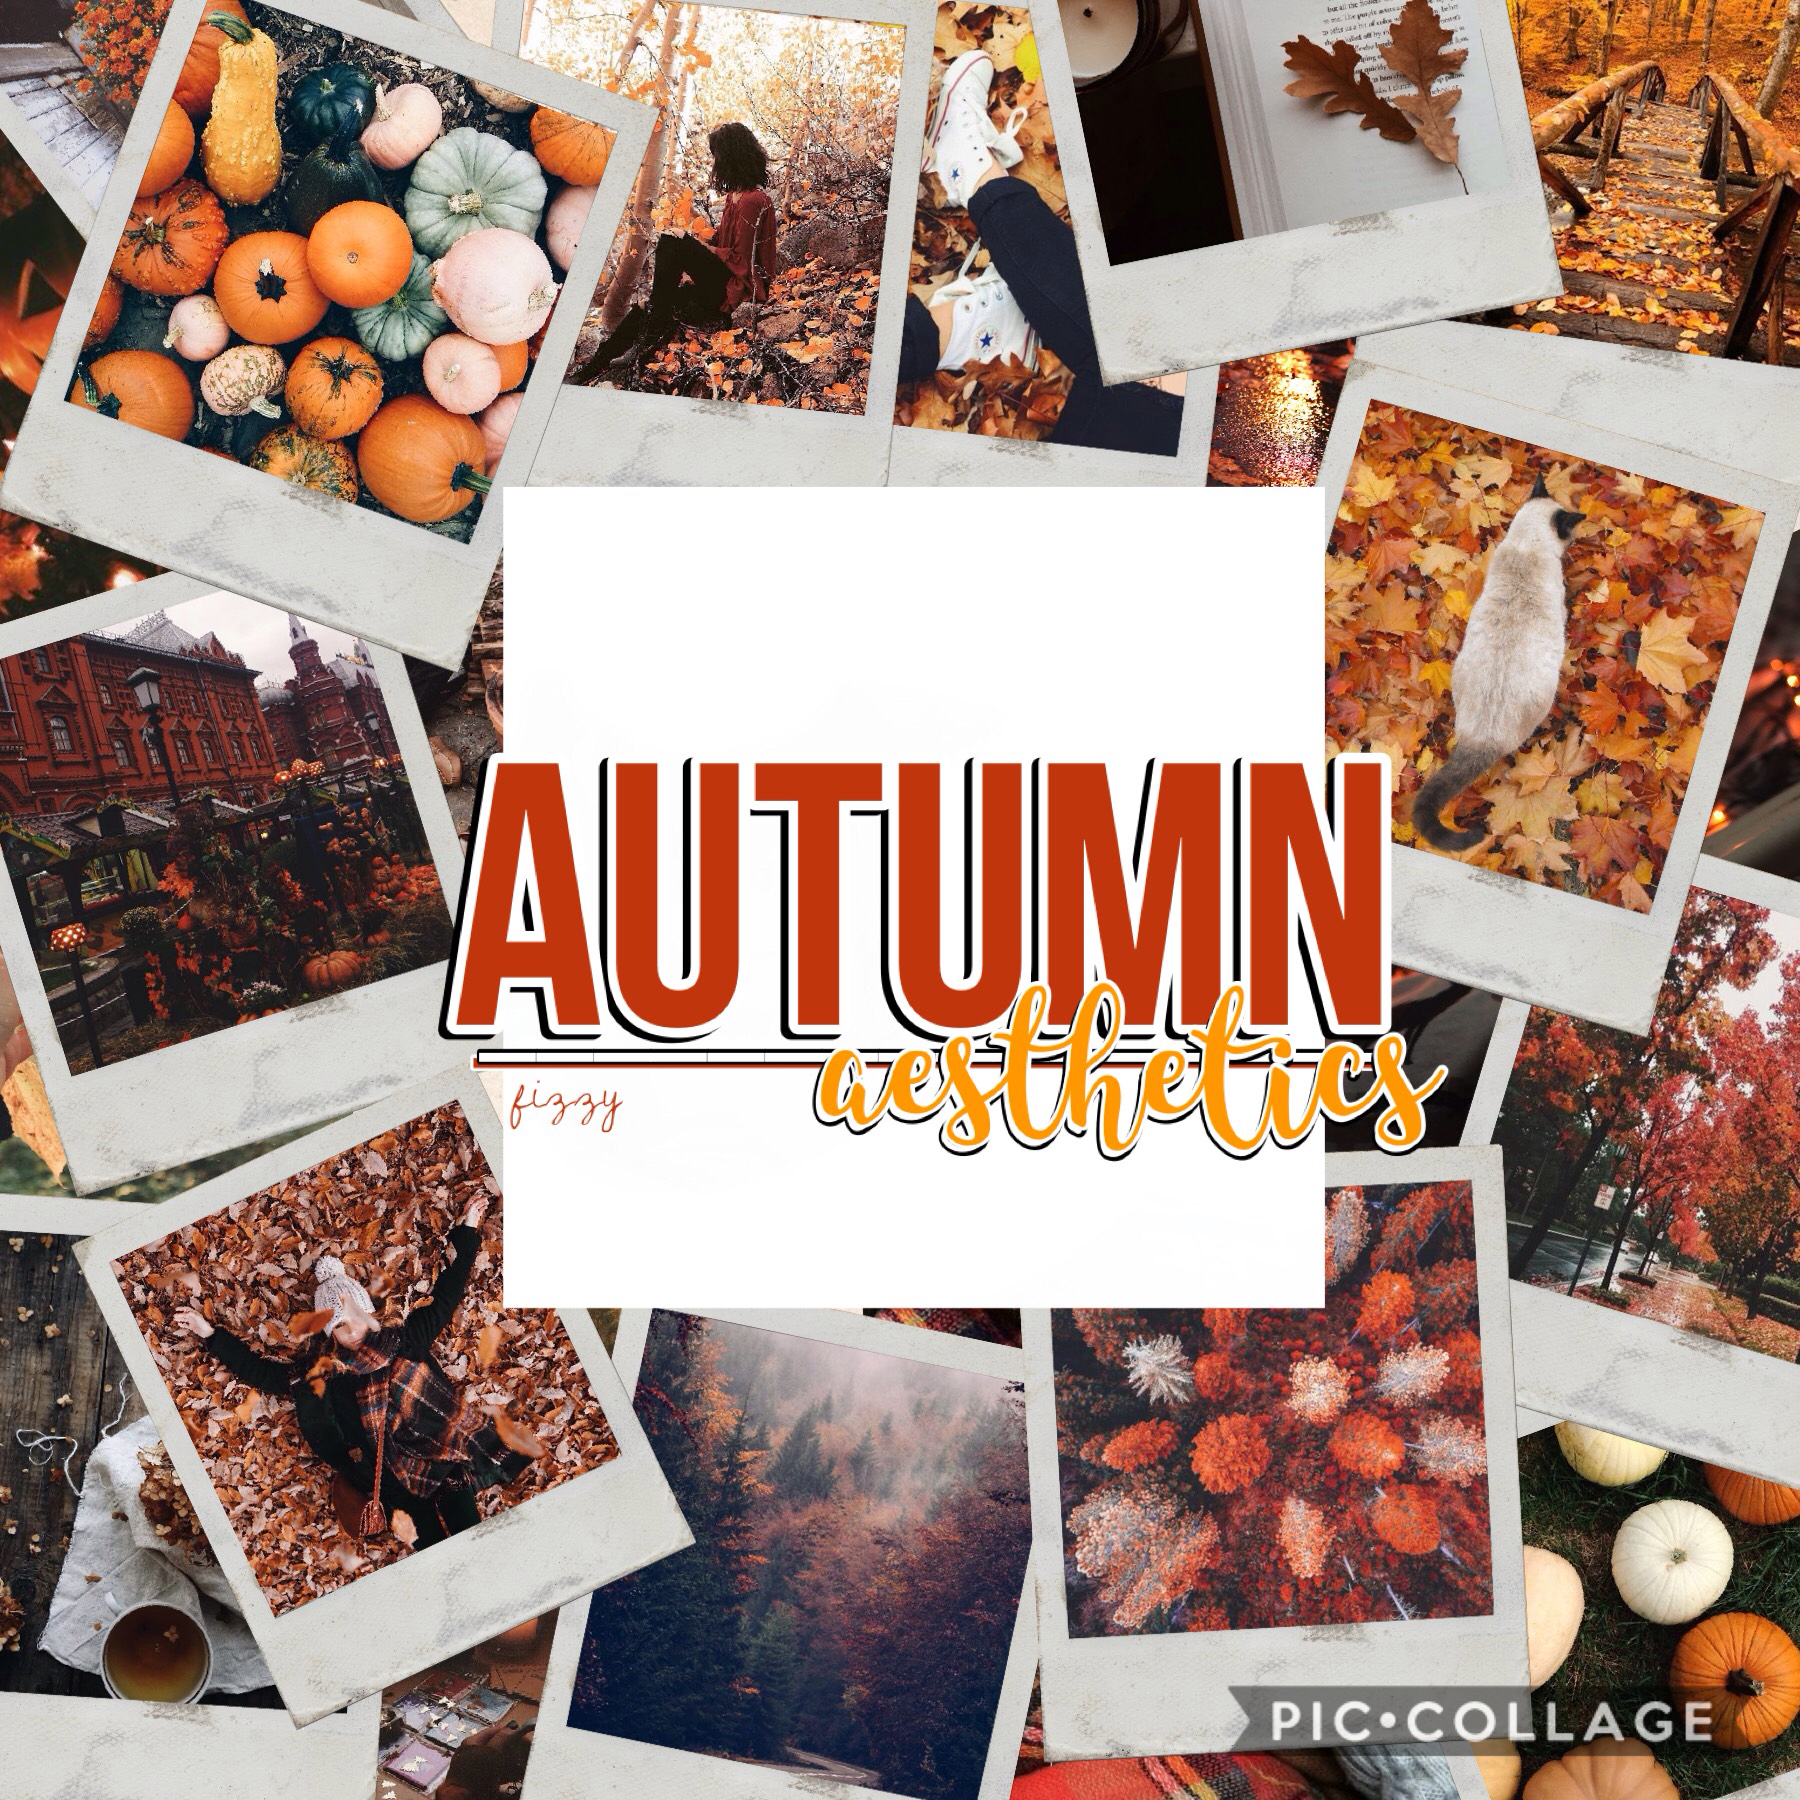 🍂TAP🍂
The leaves just started to change color and then..... it snowed 😩
QOTD:Favourite season?
AOTD:Fall/Autumn. Everything is just so pretty!!!! The leaves are amazing!